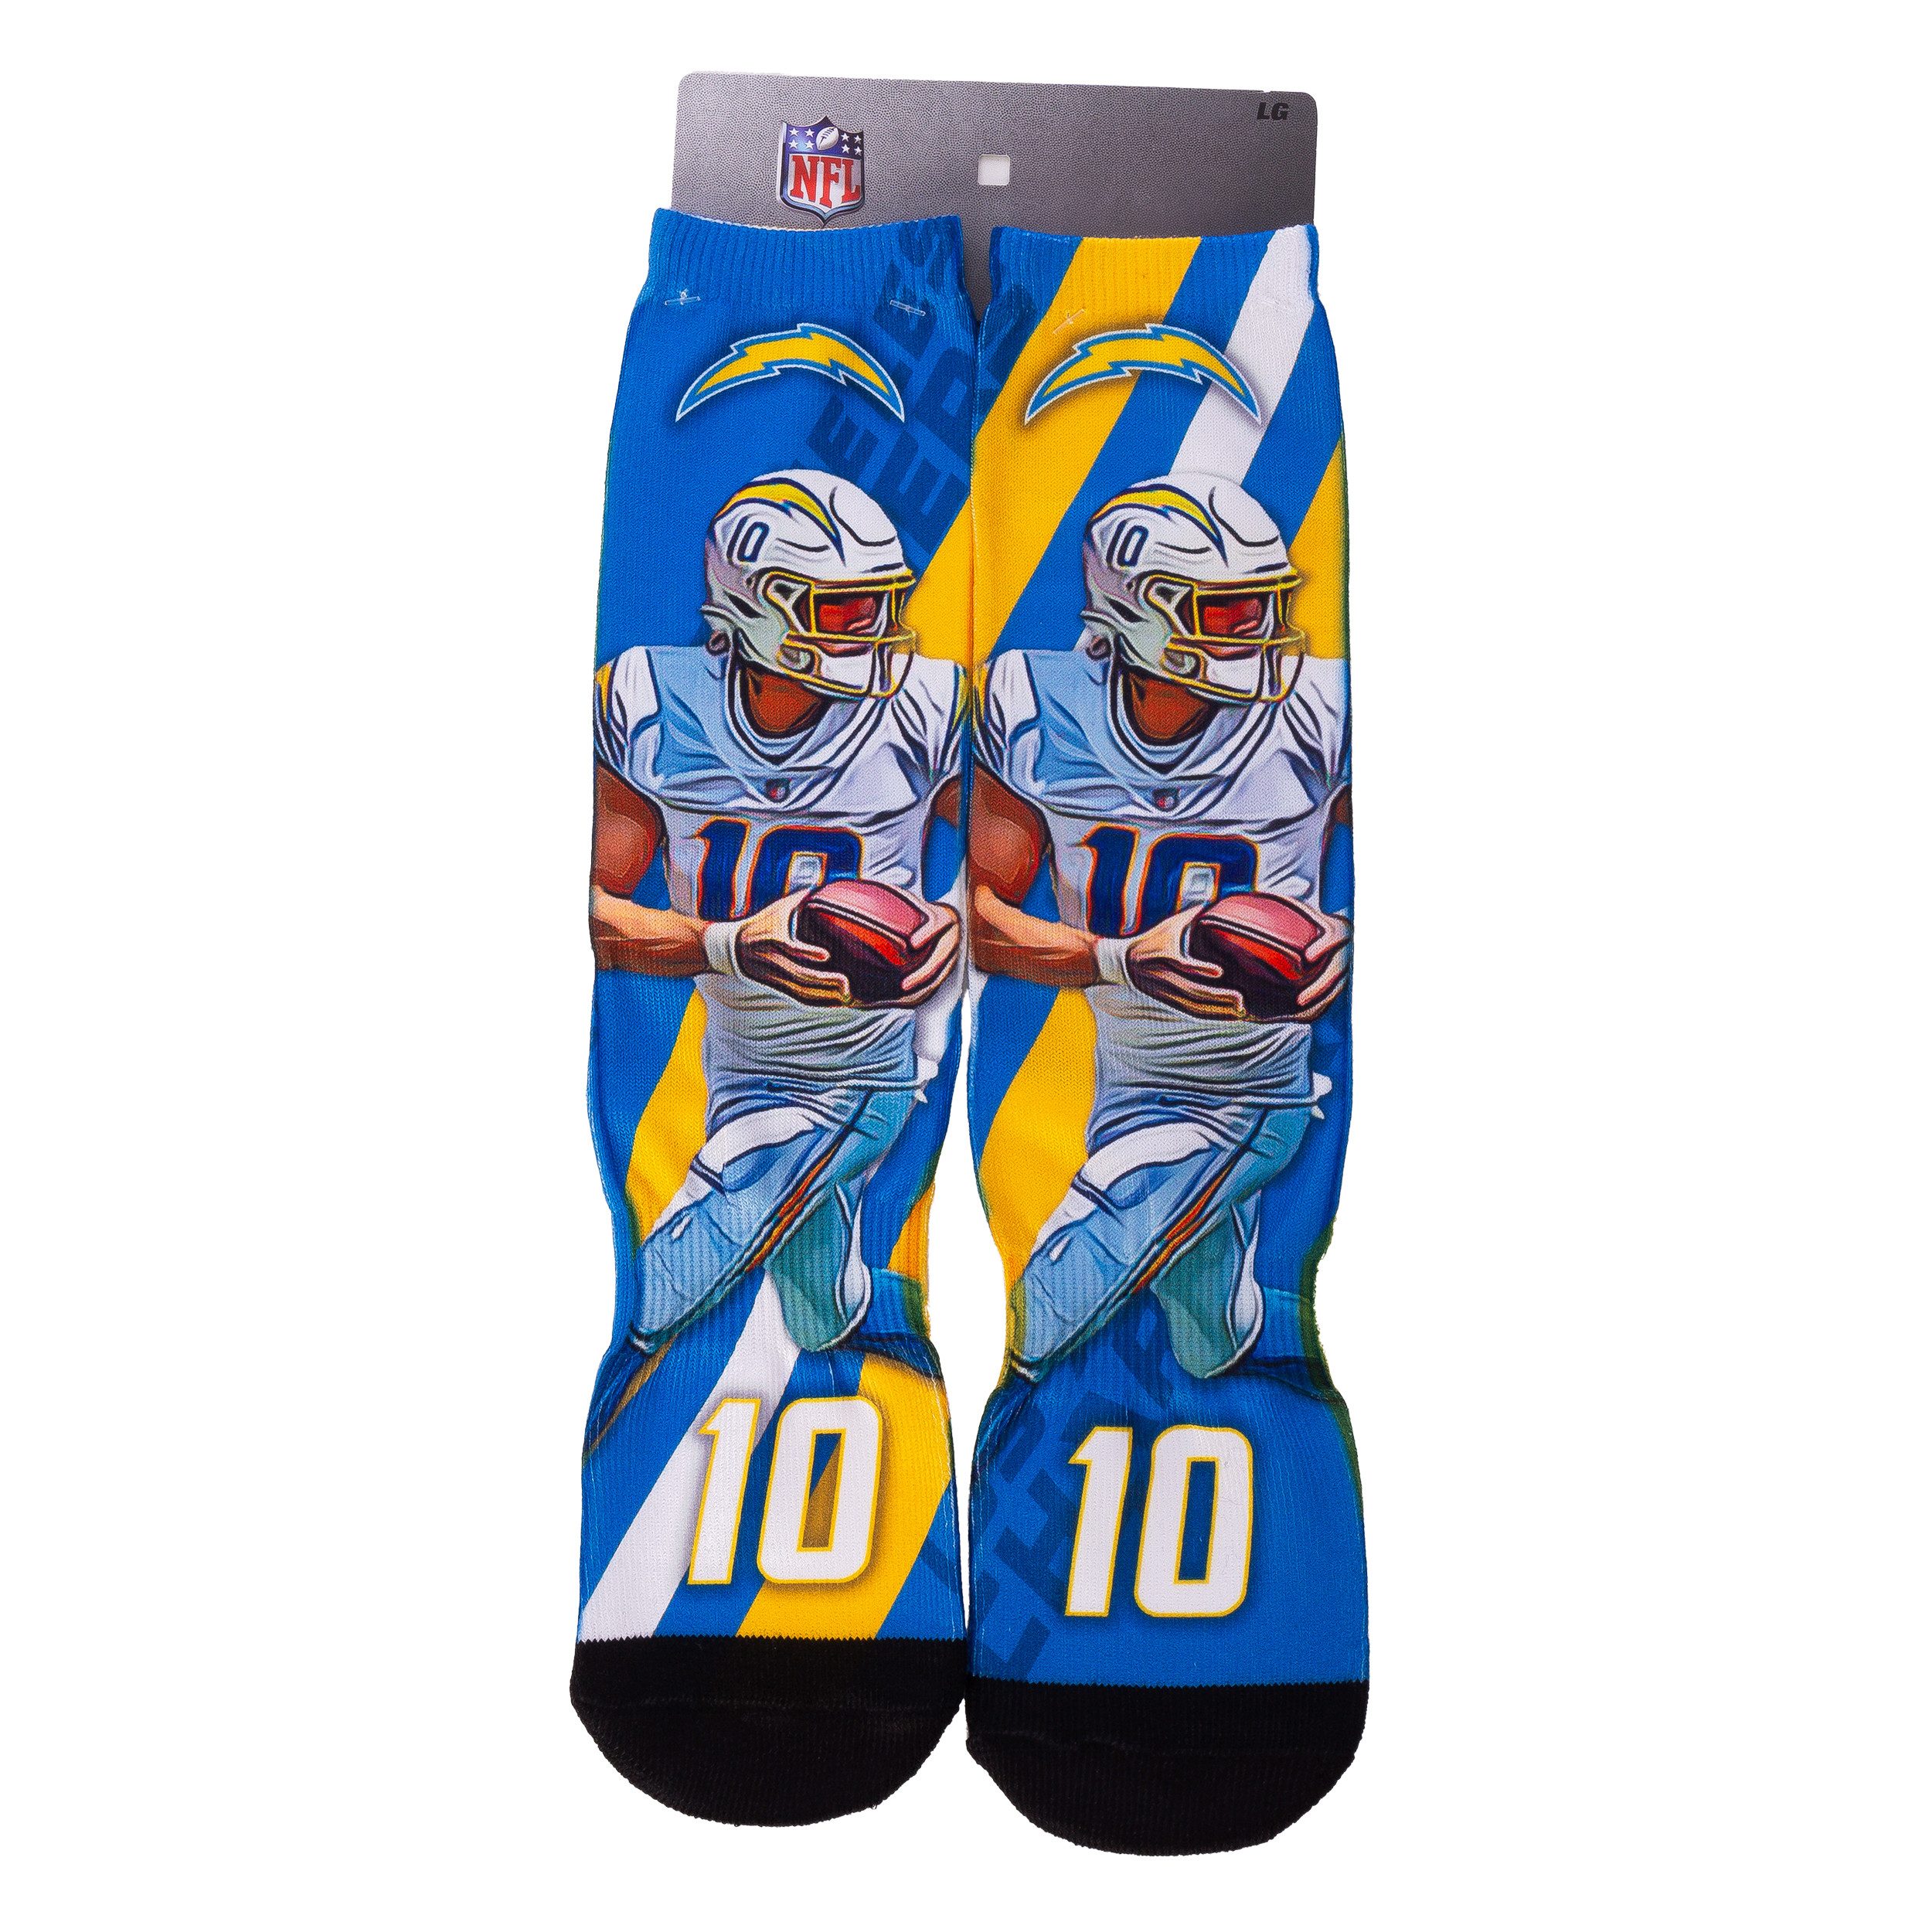 For Bare Feet Freizeitsocken Socken NFL Los Angeles Chargers Justin H, G L (1-Paar)